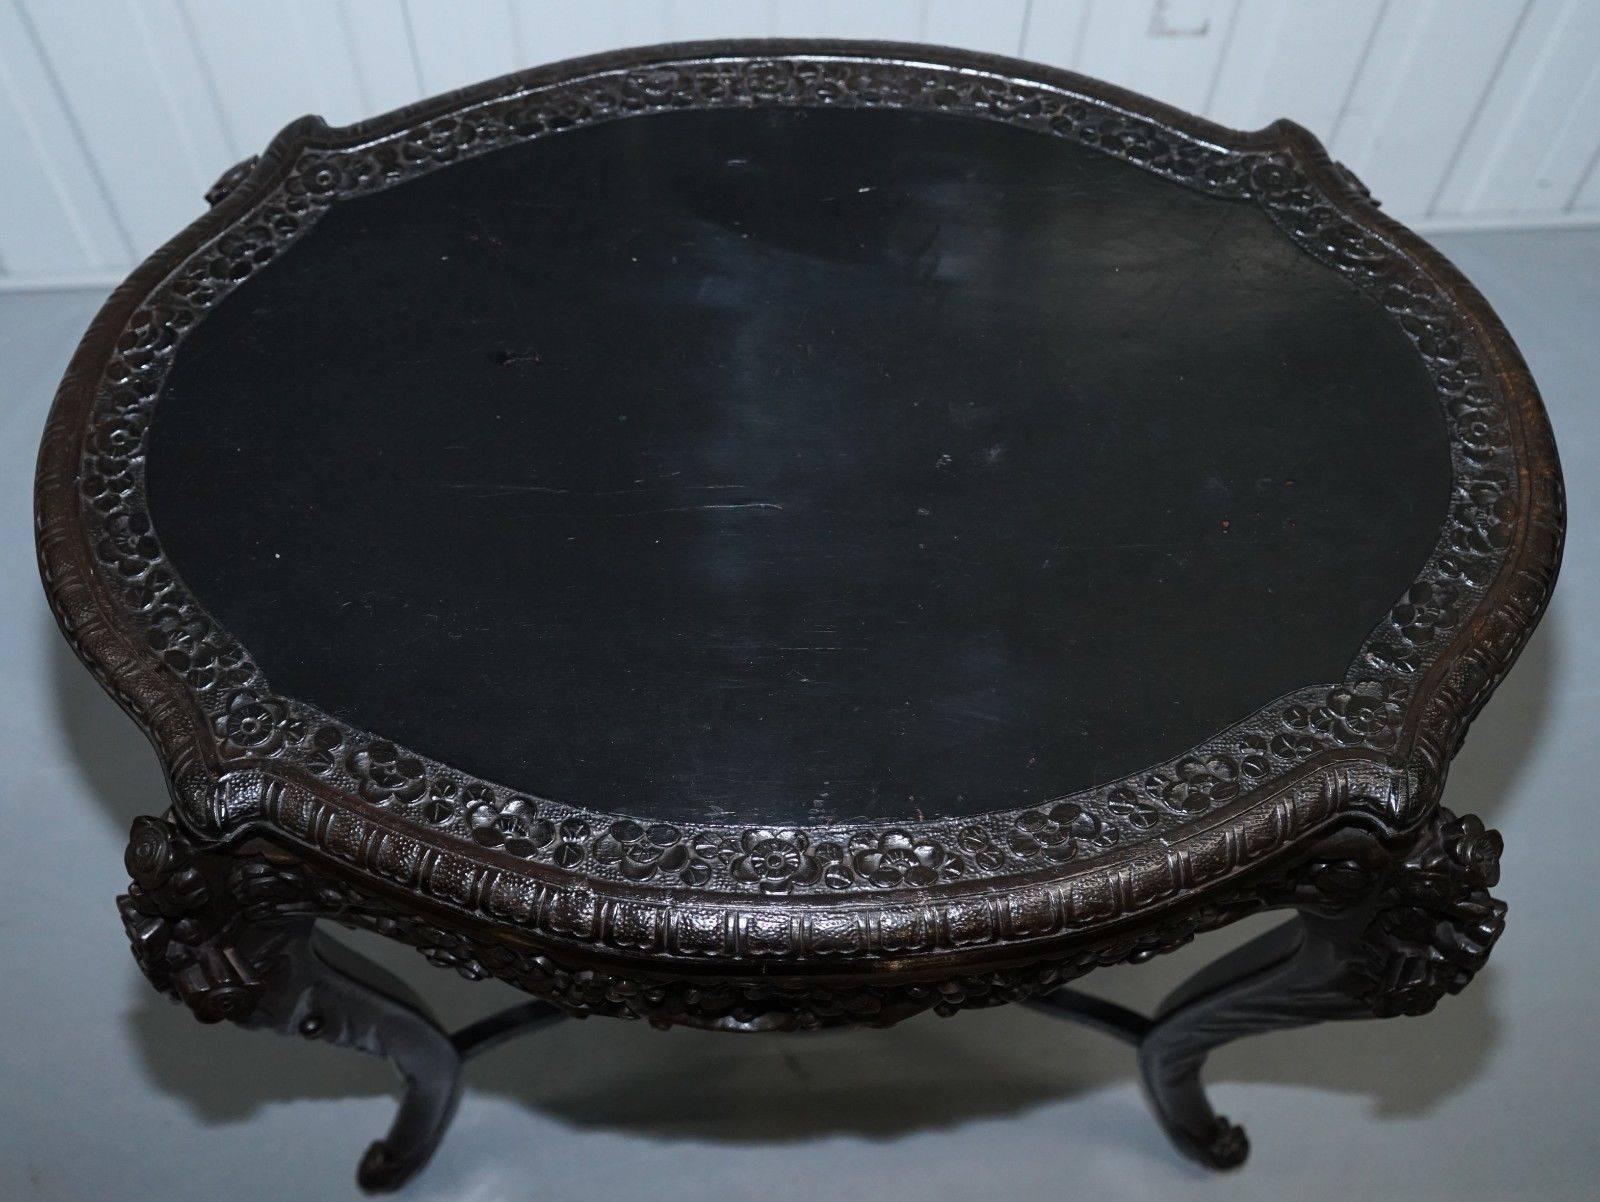 We are delighted to offer for sale this stunning heavily carved and black lacquered Chinese export oval centre table, circa 1900.

A very good looking and well made piece, carved all around the trim and tops of the legs with floral leaf foliage